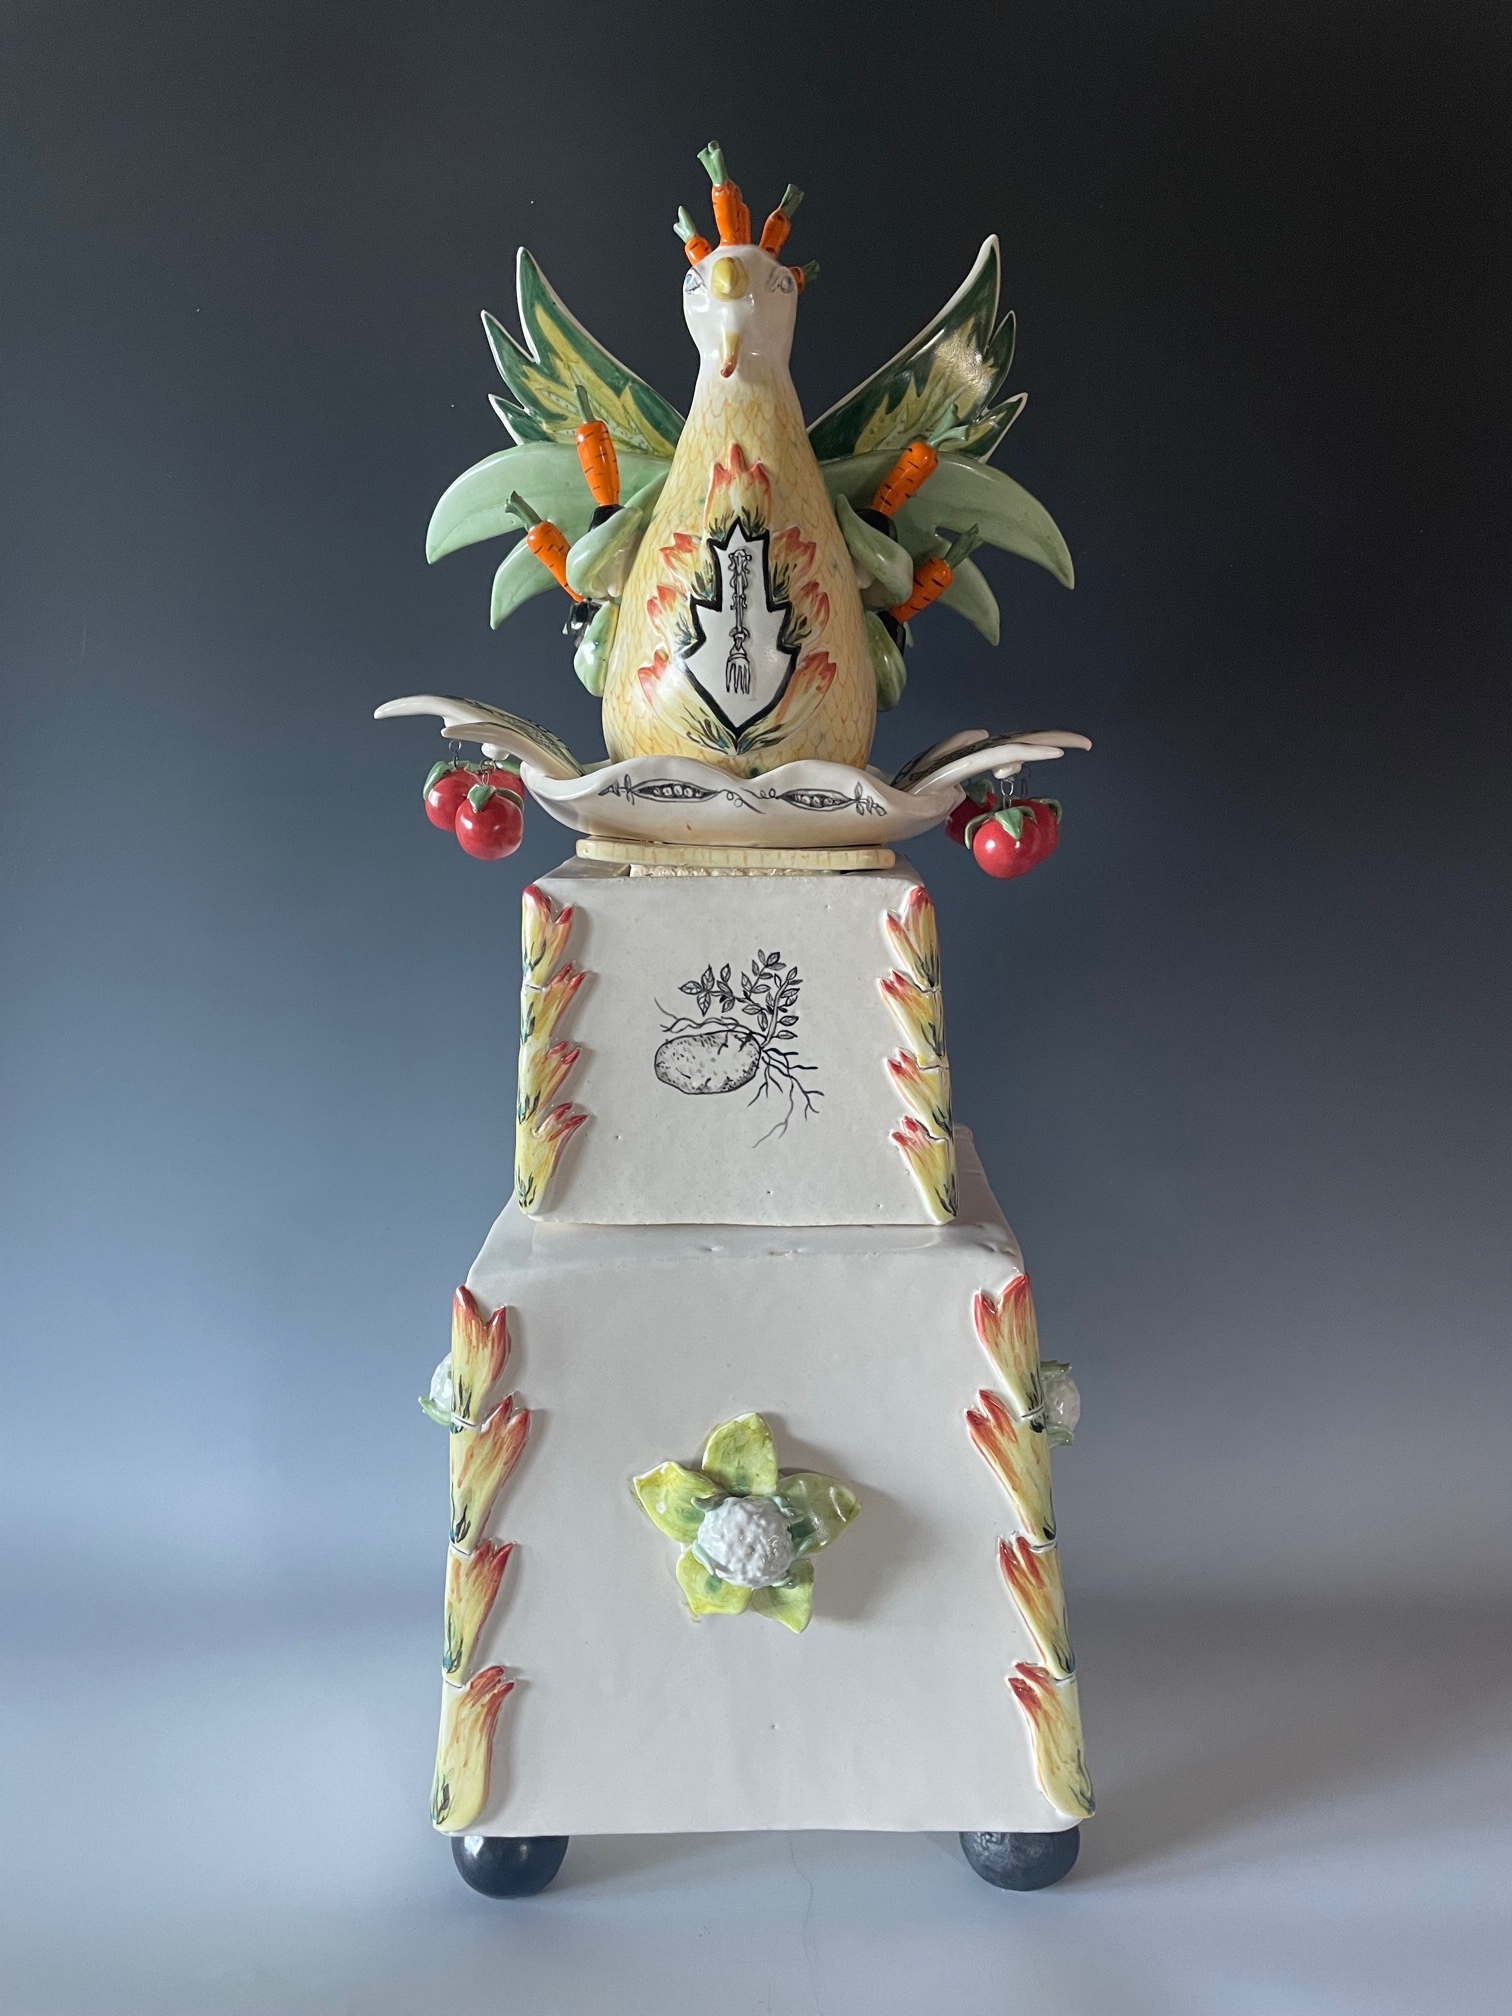 Irène  de Watteville, Phoenix Rising from the ashes of a Spanish Tortilla, 2023. Paper clay, frost porcelain and porcelain: the glaze is a Cone 5 Majolica., 7” x 7” x 19”.